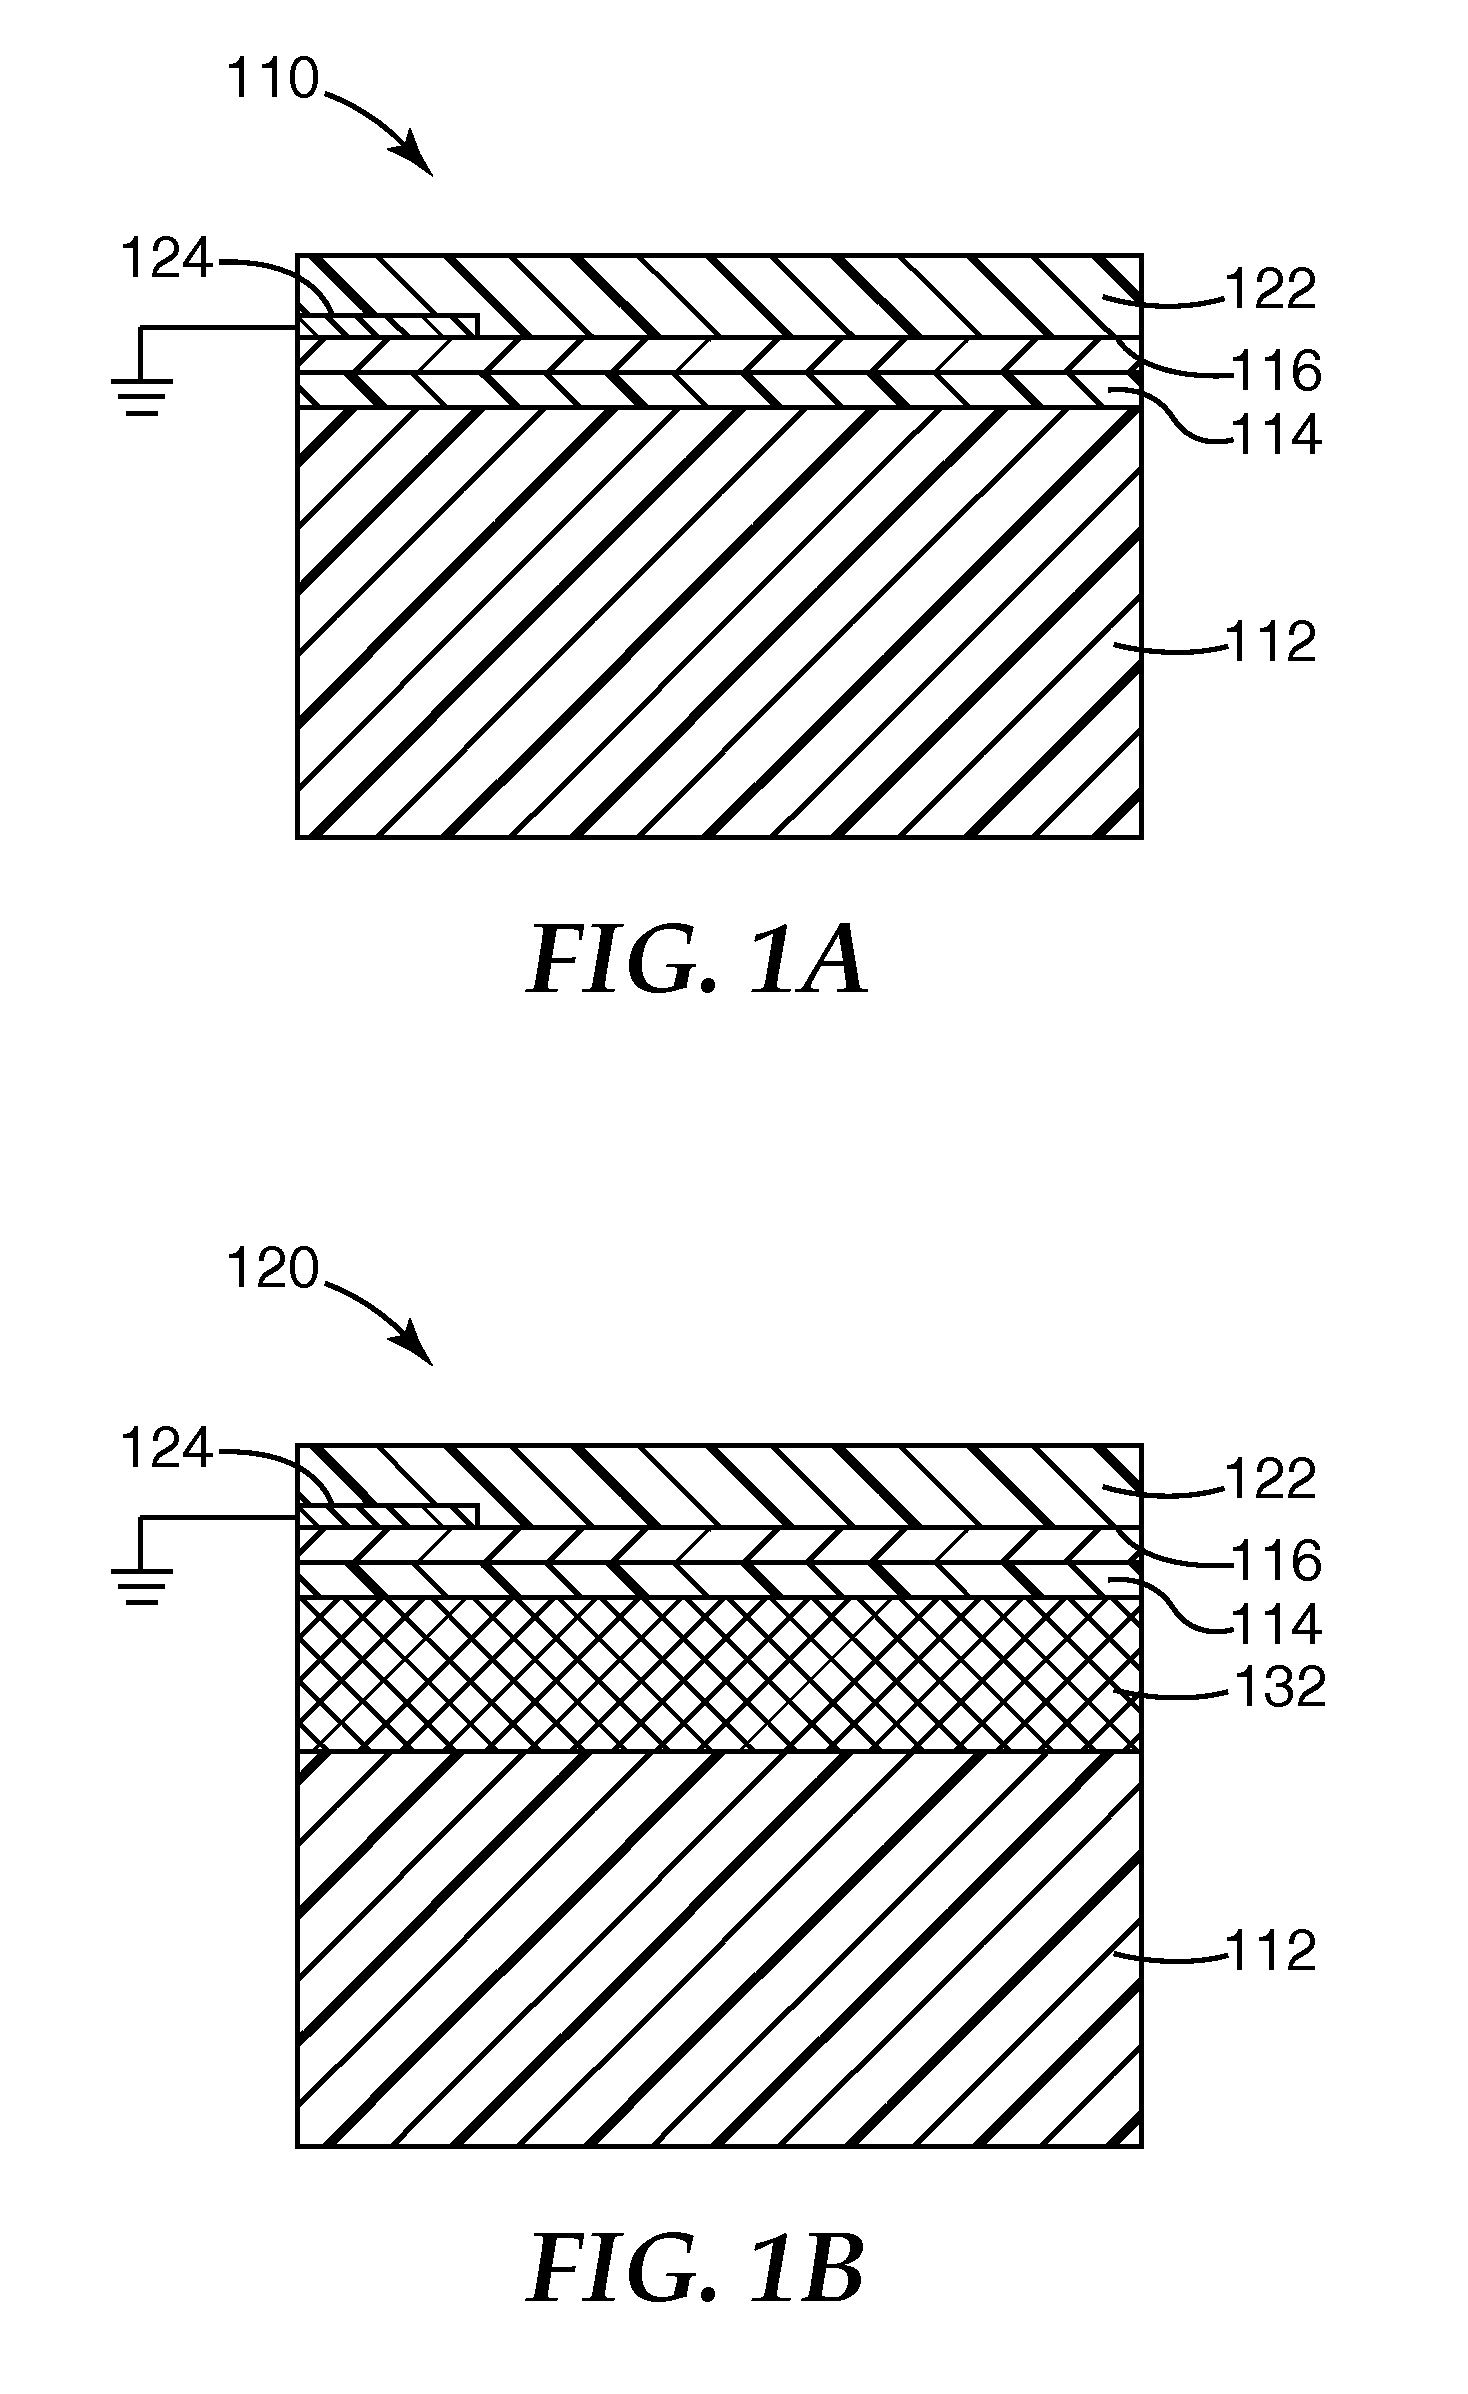 Nucleation layer for thin film metal layer formation